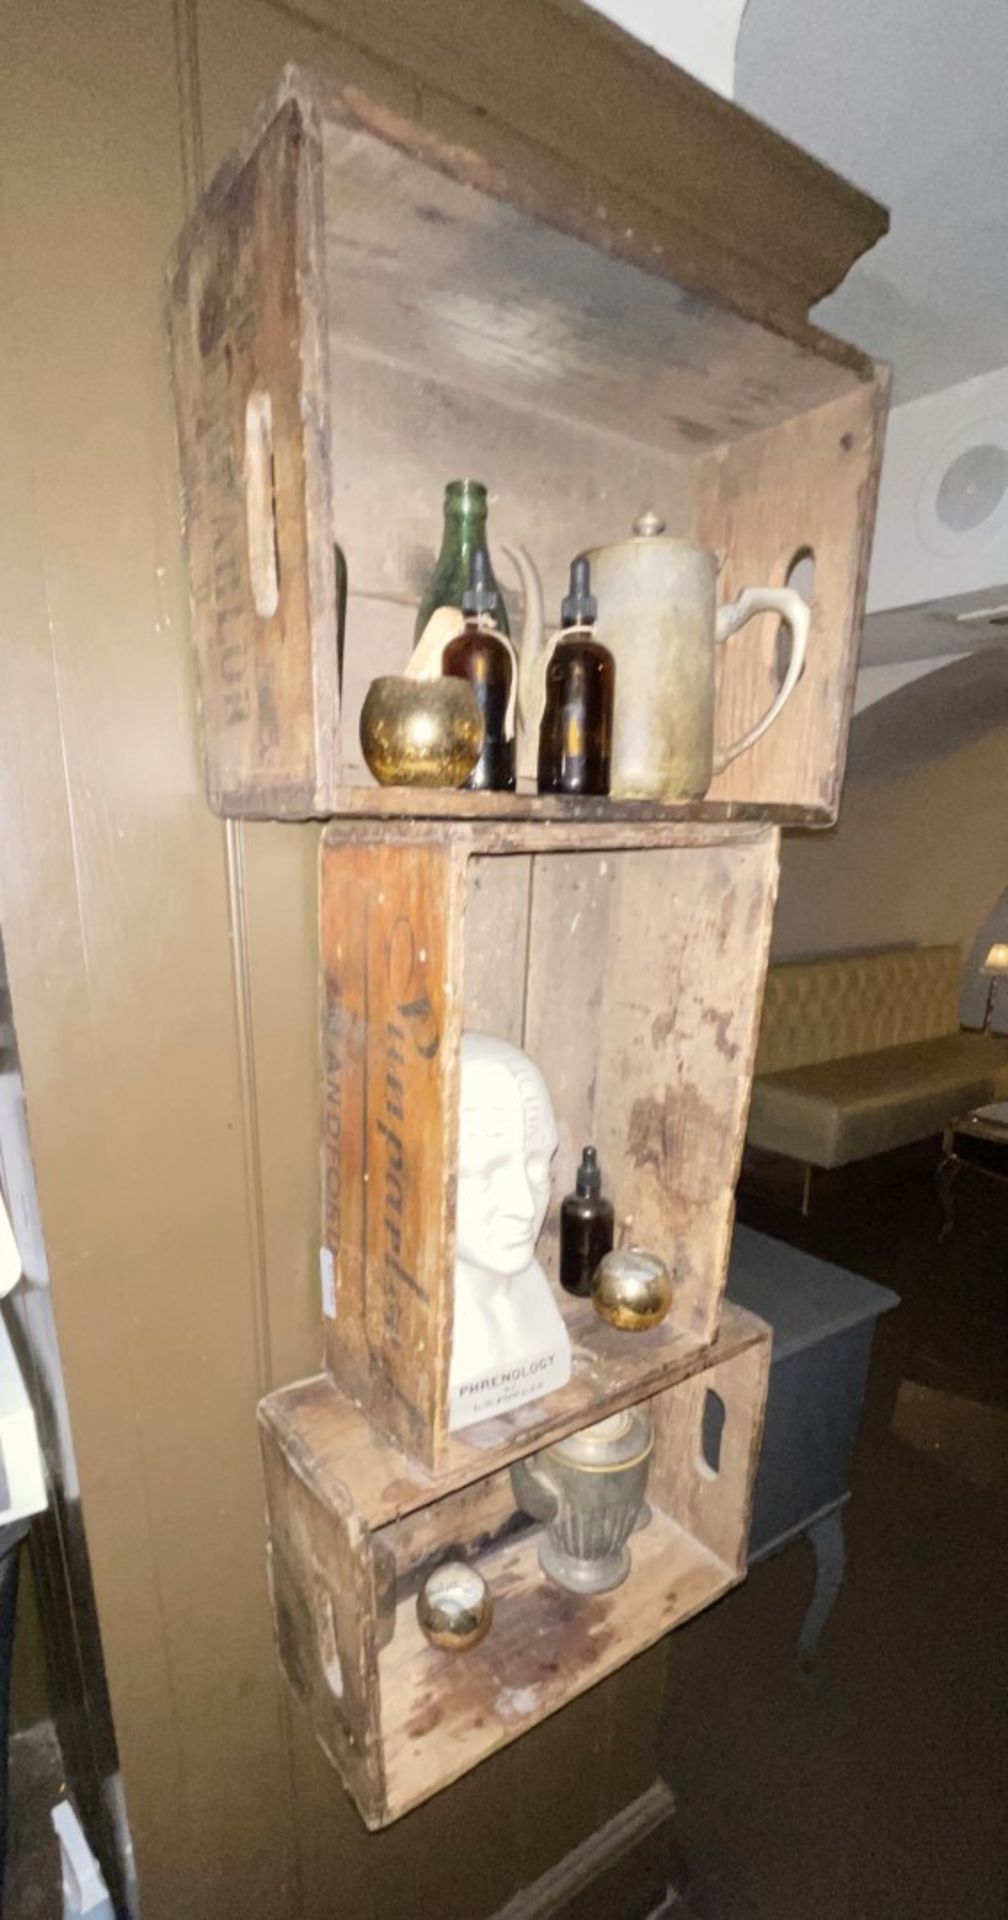 3 x Ford Branded Wall Mounted Soap Boxes and Vintage Contents Within Including Phrenology Bust - Image 2 of 6